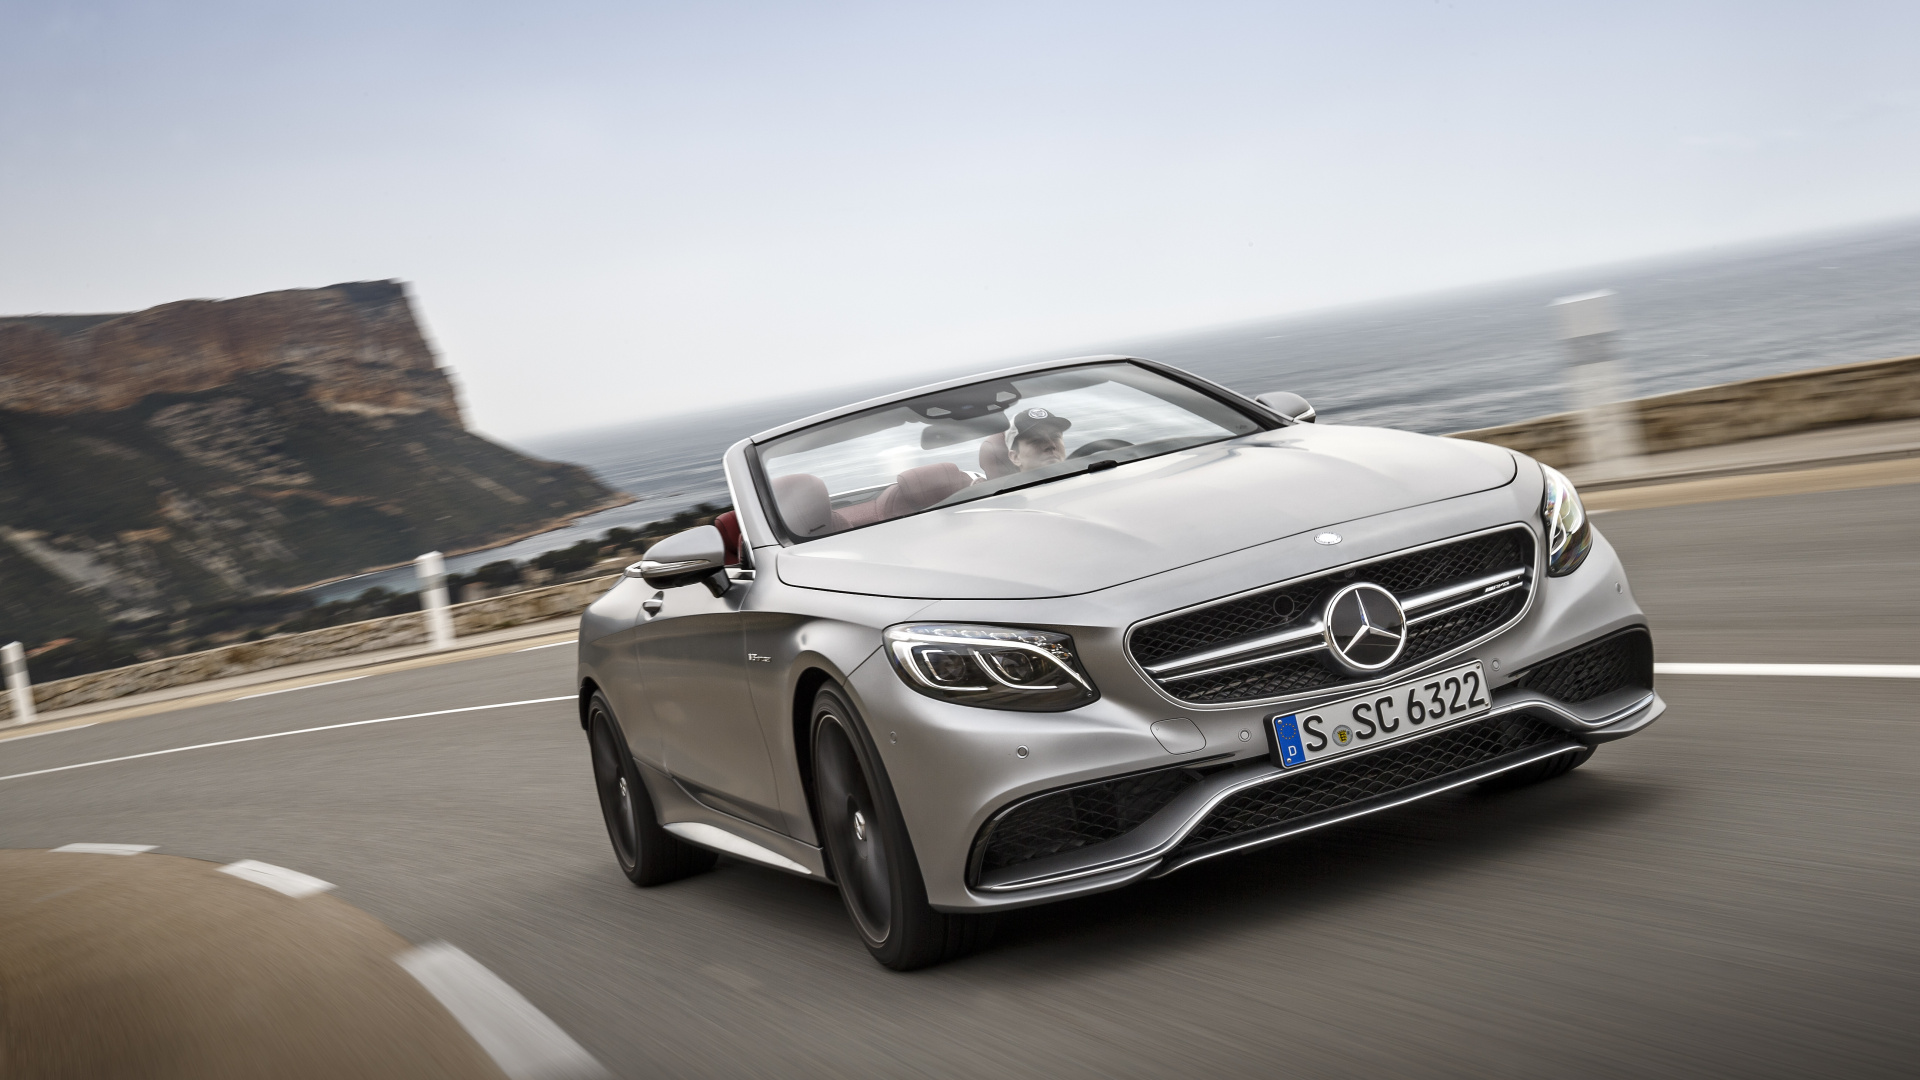 Gray Mercedes Benz Convertible Coupe on Road During Daytime. Wallpaper in 1920x1080 Resolution